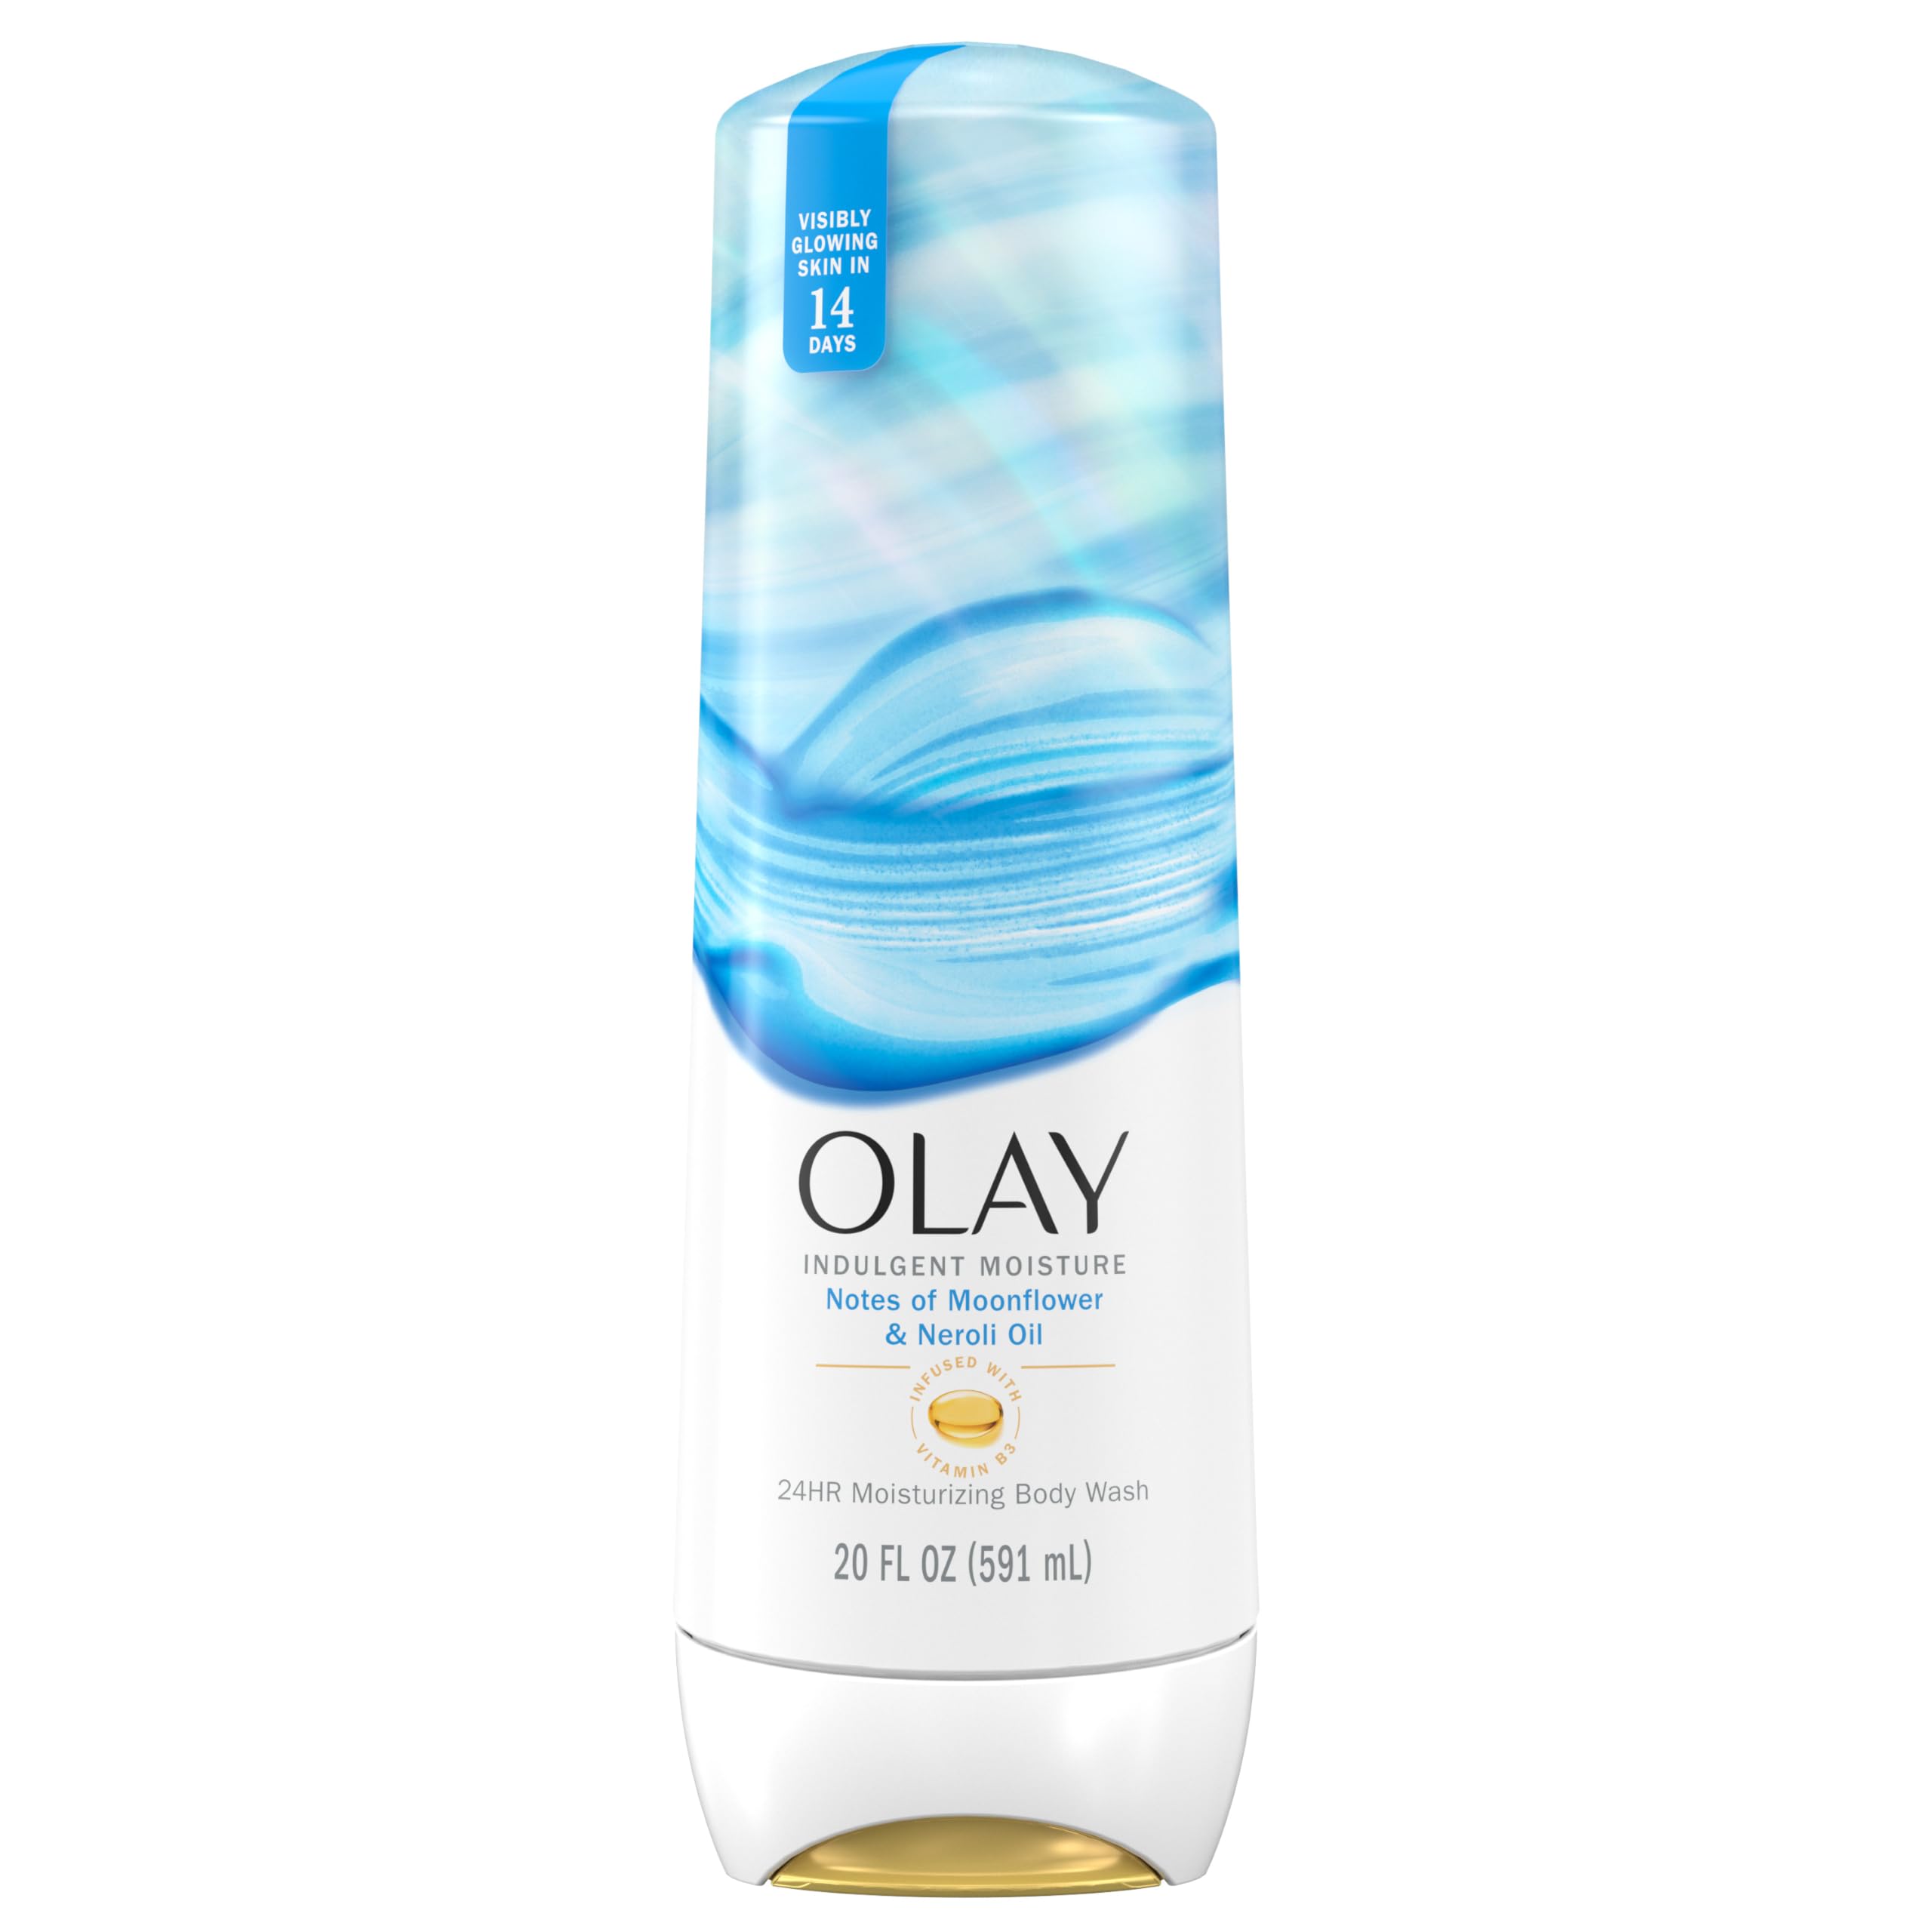 Olay Indulgent Moisture Body Wash for Women, Infused with Vitamin B3, Notes of Moonflower and Neroli Oil Scent, 20 fl oz